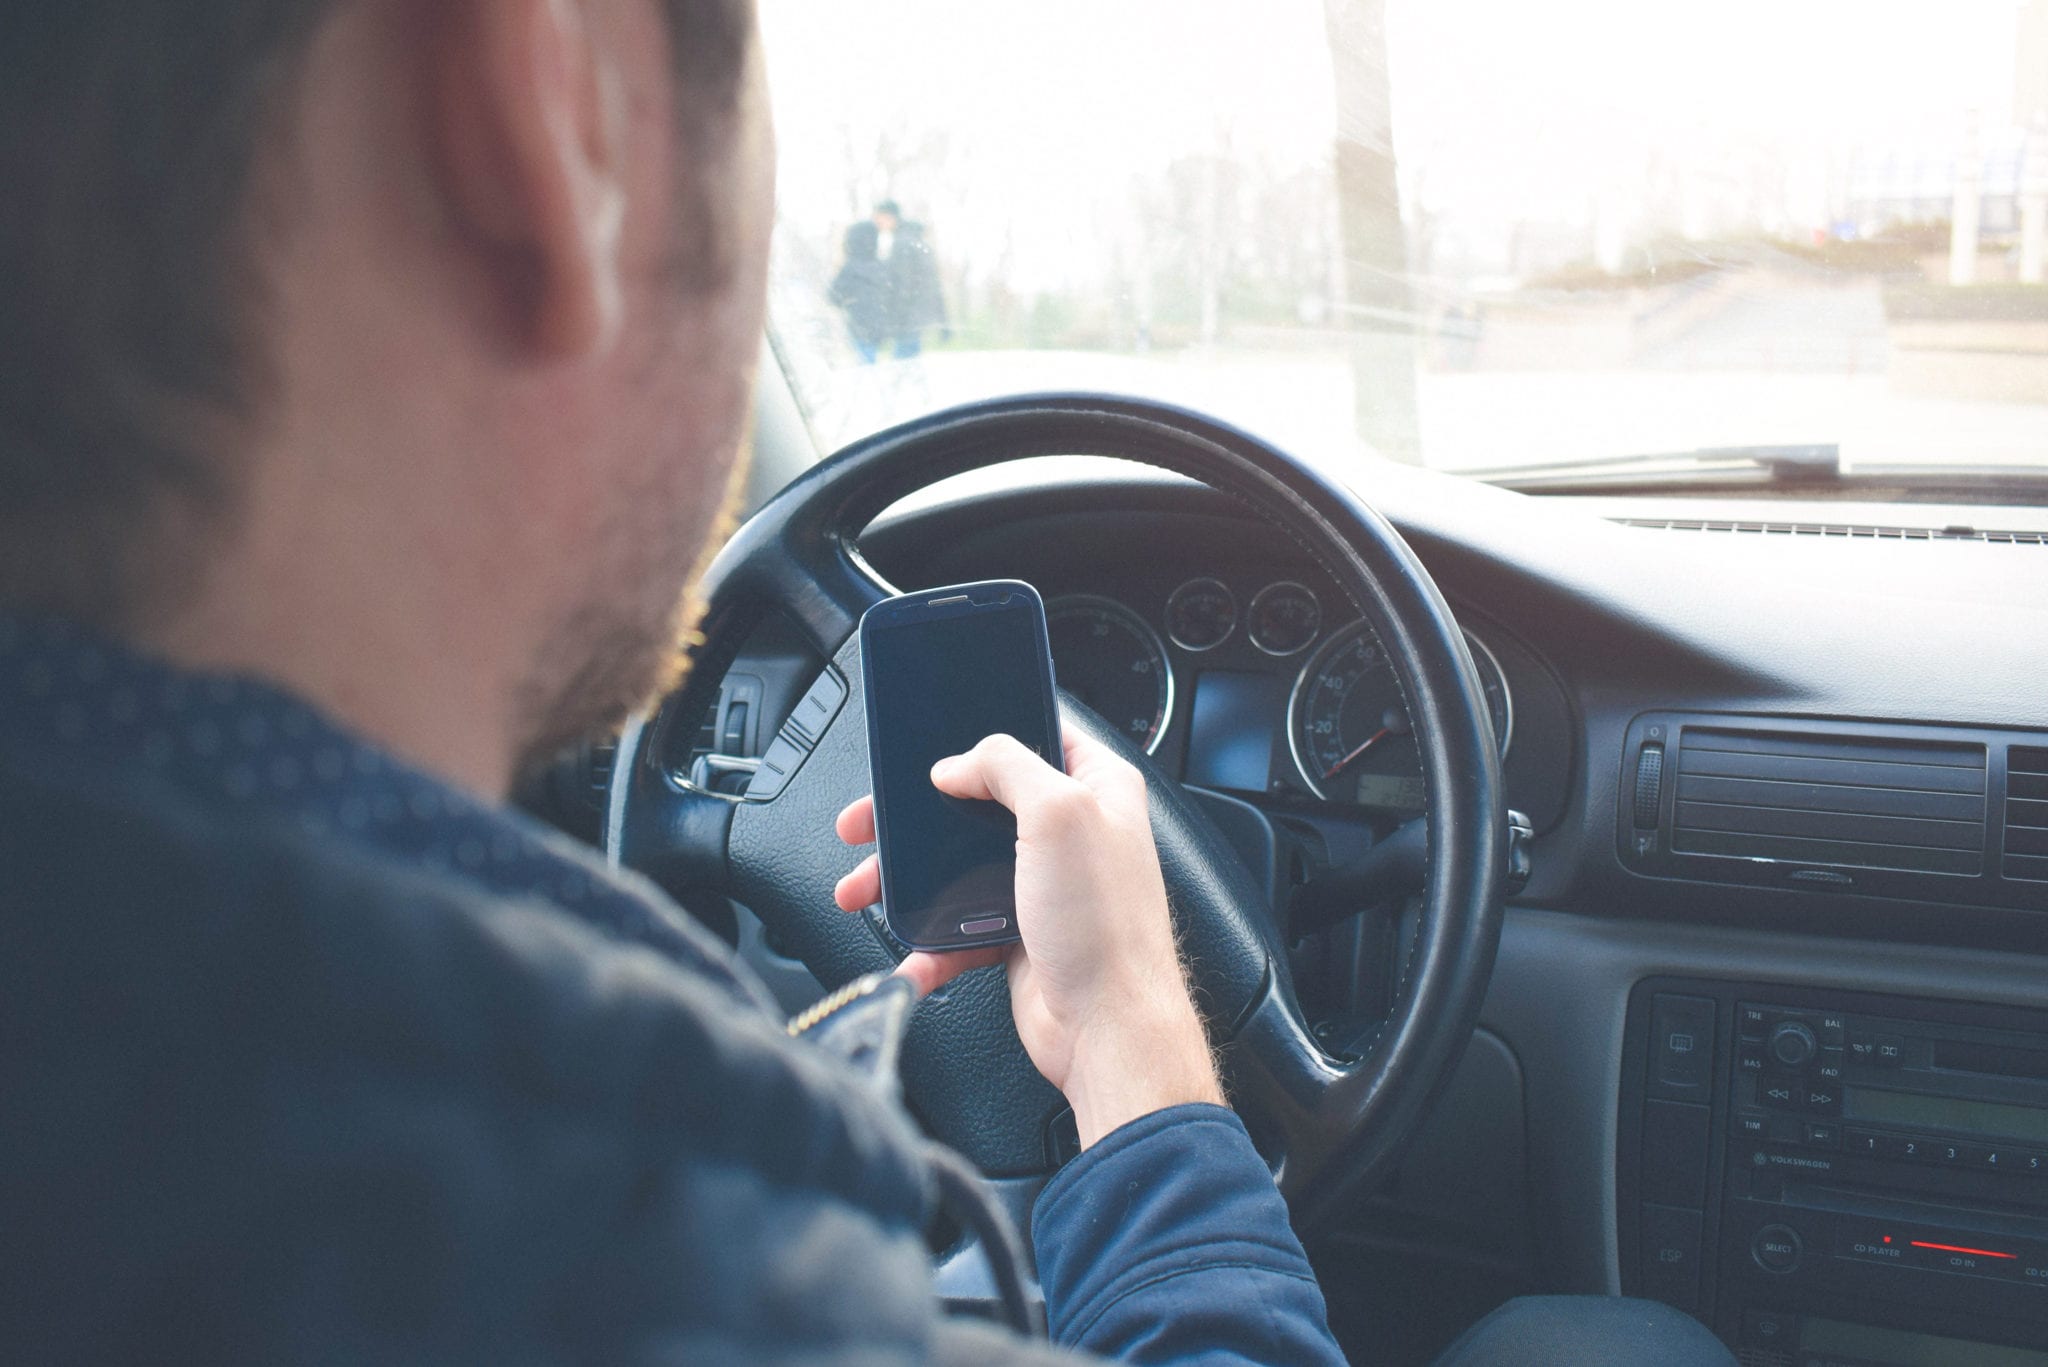 Man sitting behind wheel of car holding smart phone in one hand